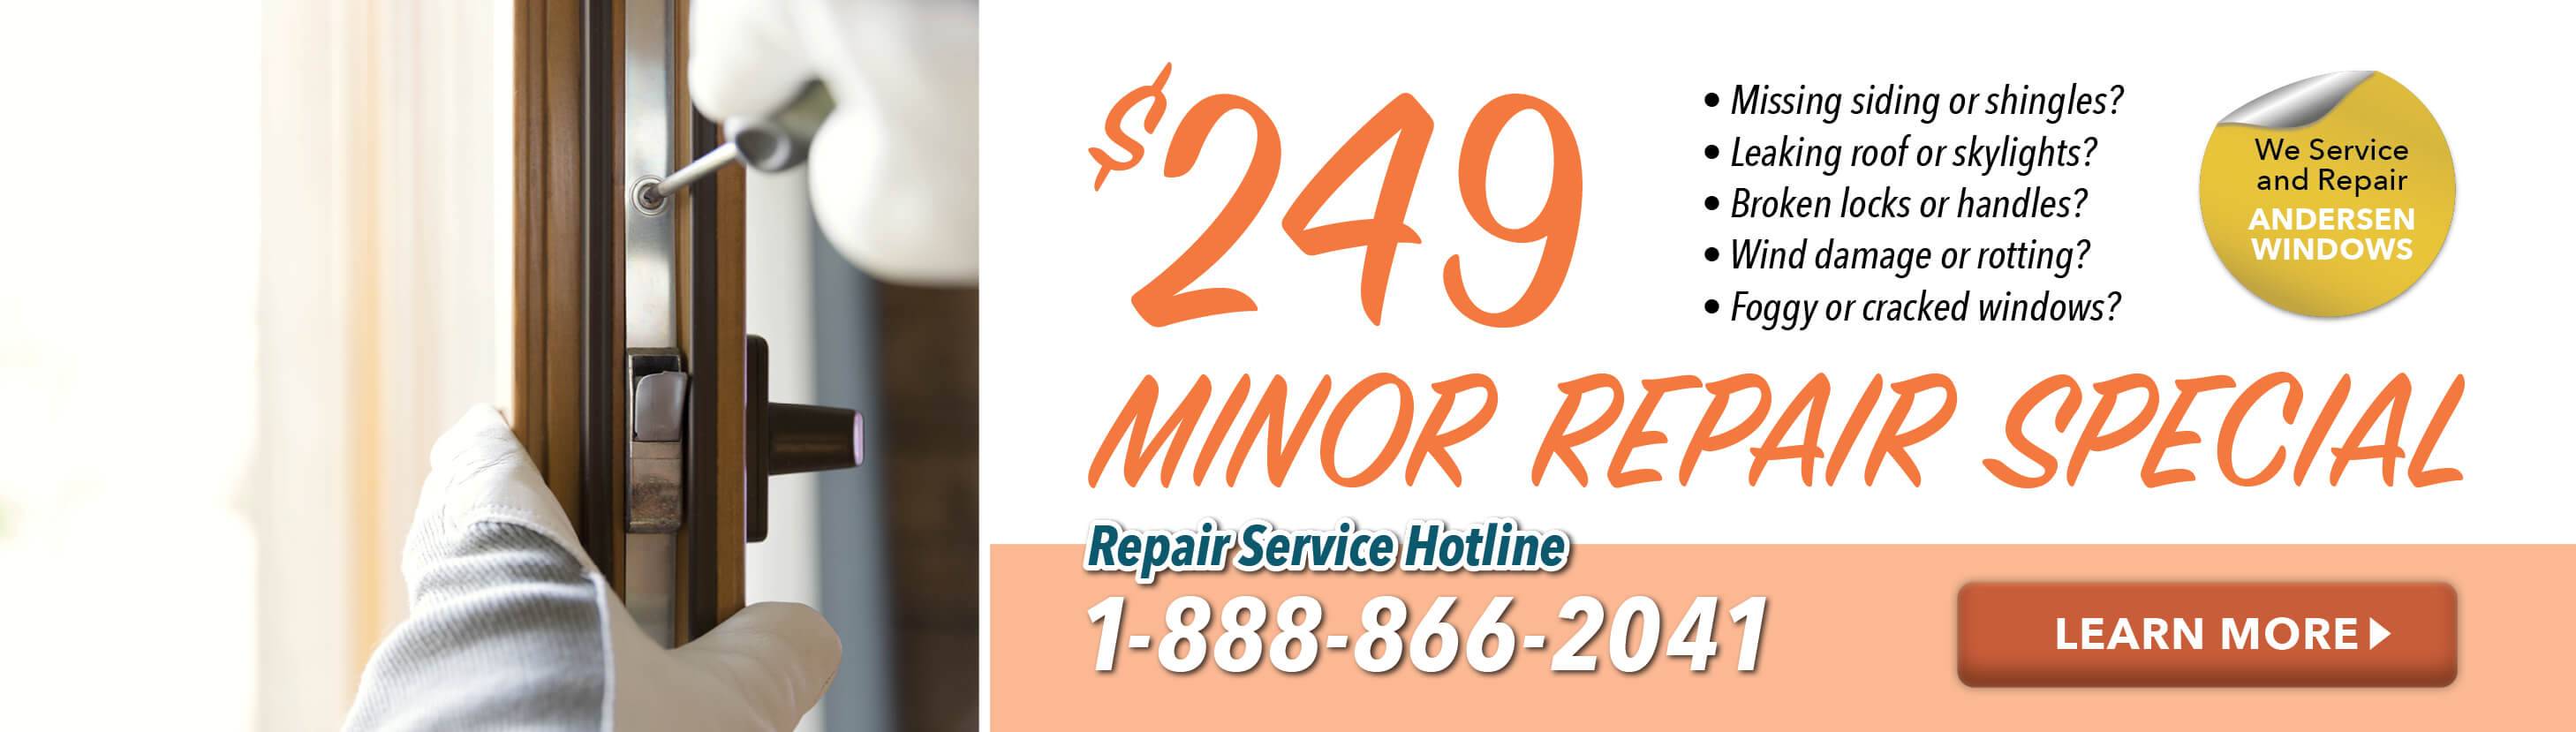 $249 Minor repair special missing leaking broken exterior products we can fix them with our window door roofing siding repair team